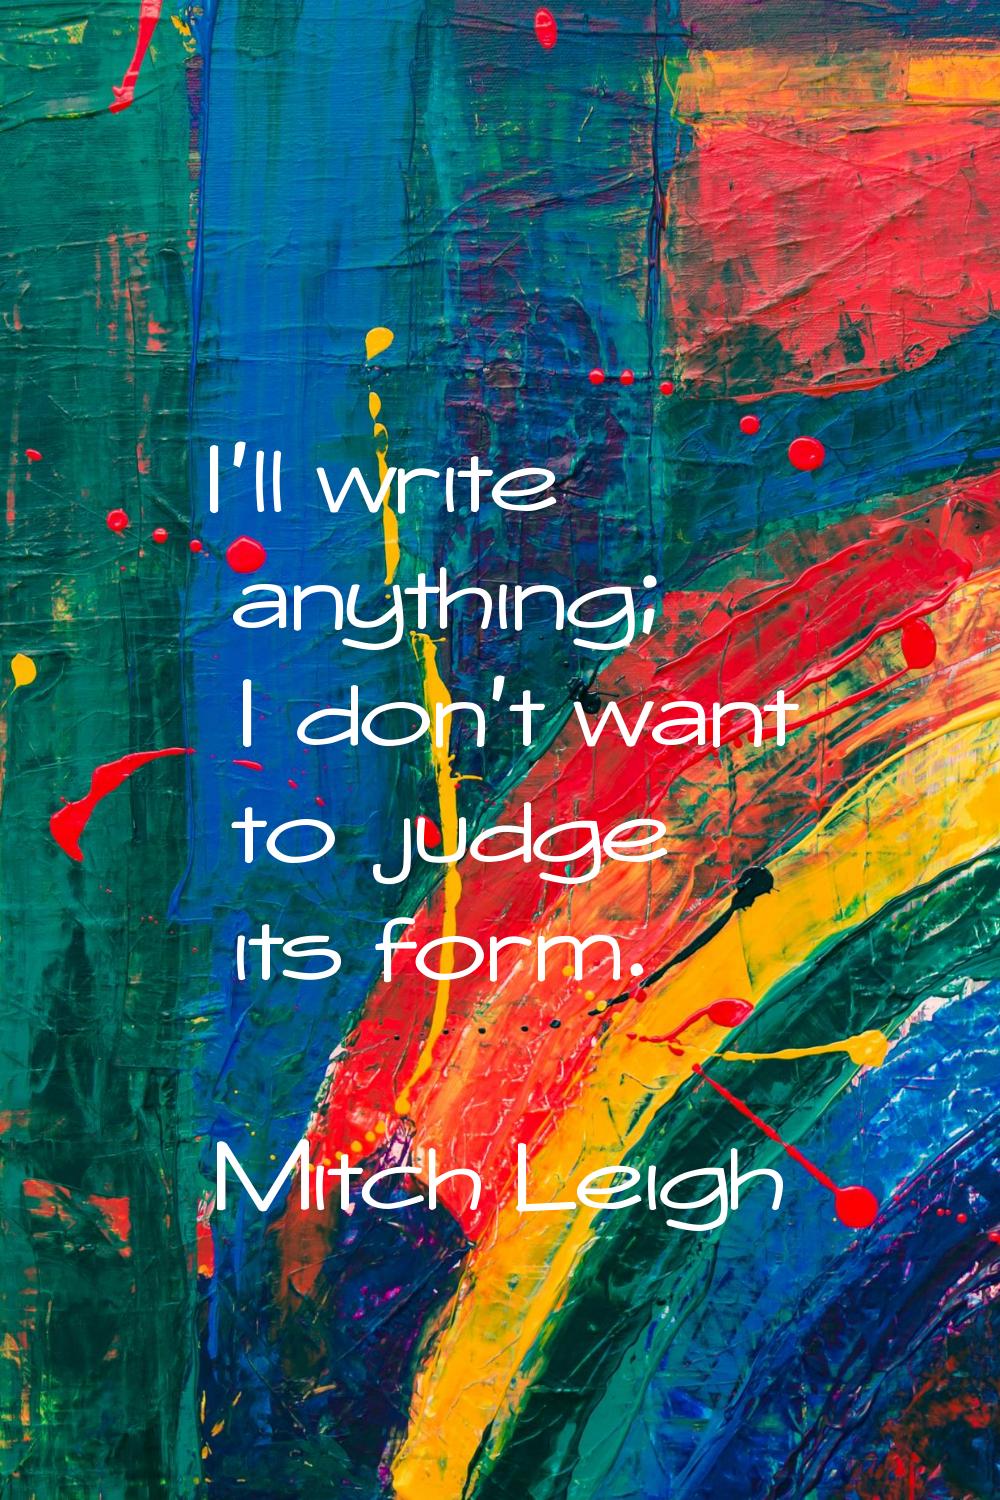 I'll write anything; I don't want to judge its form.